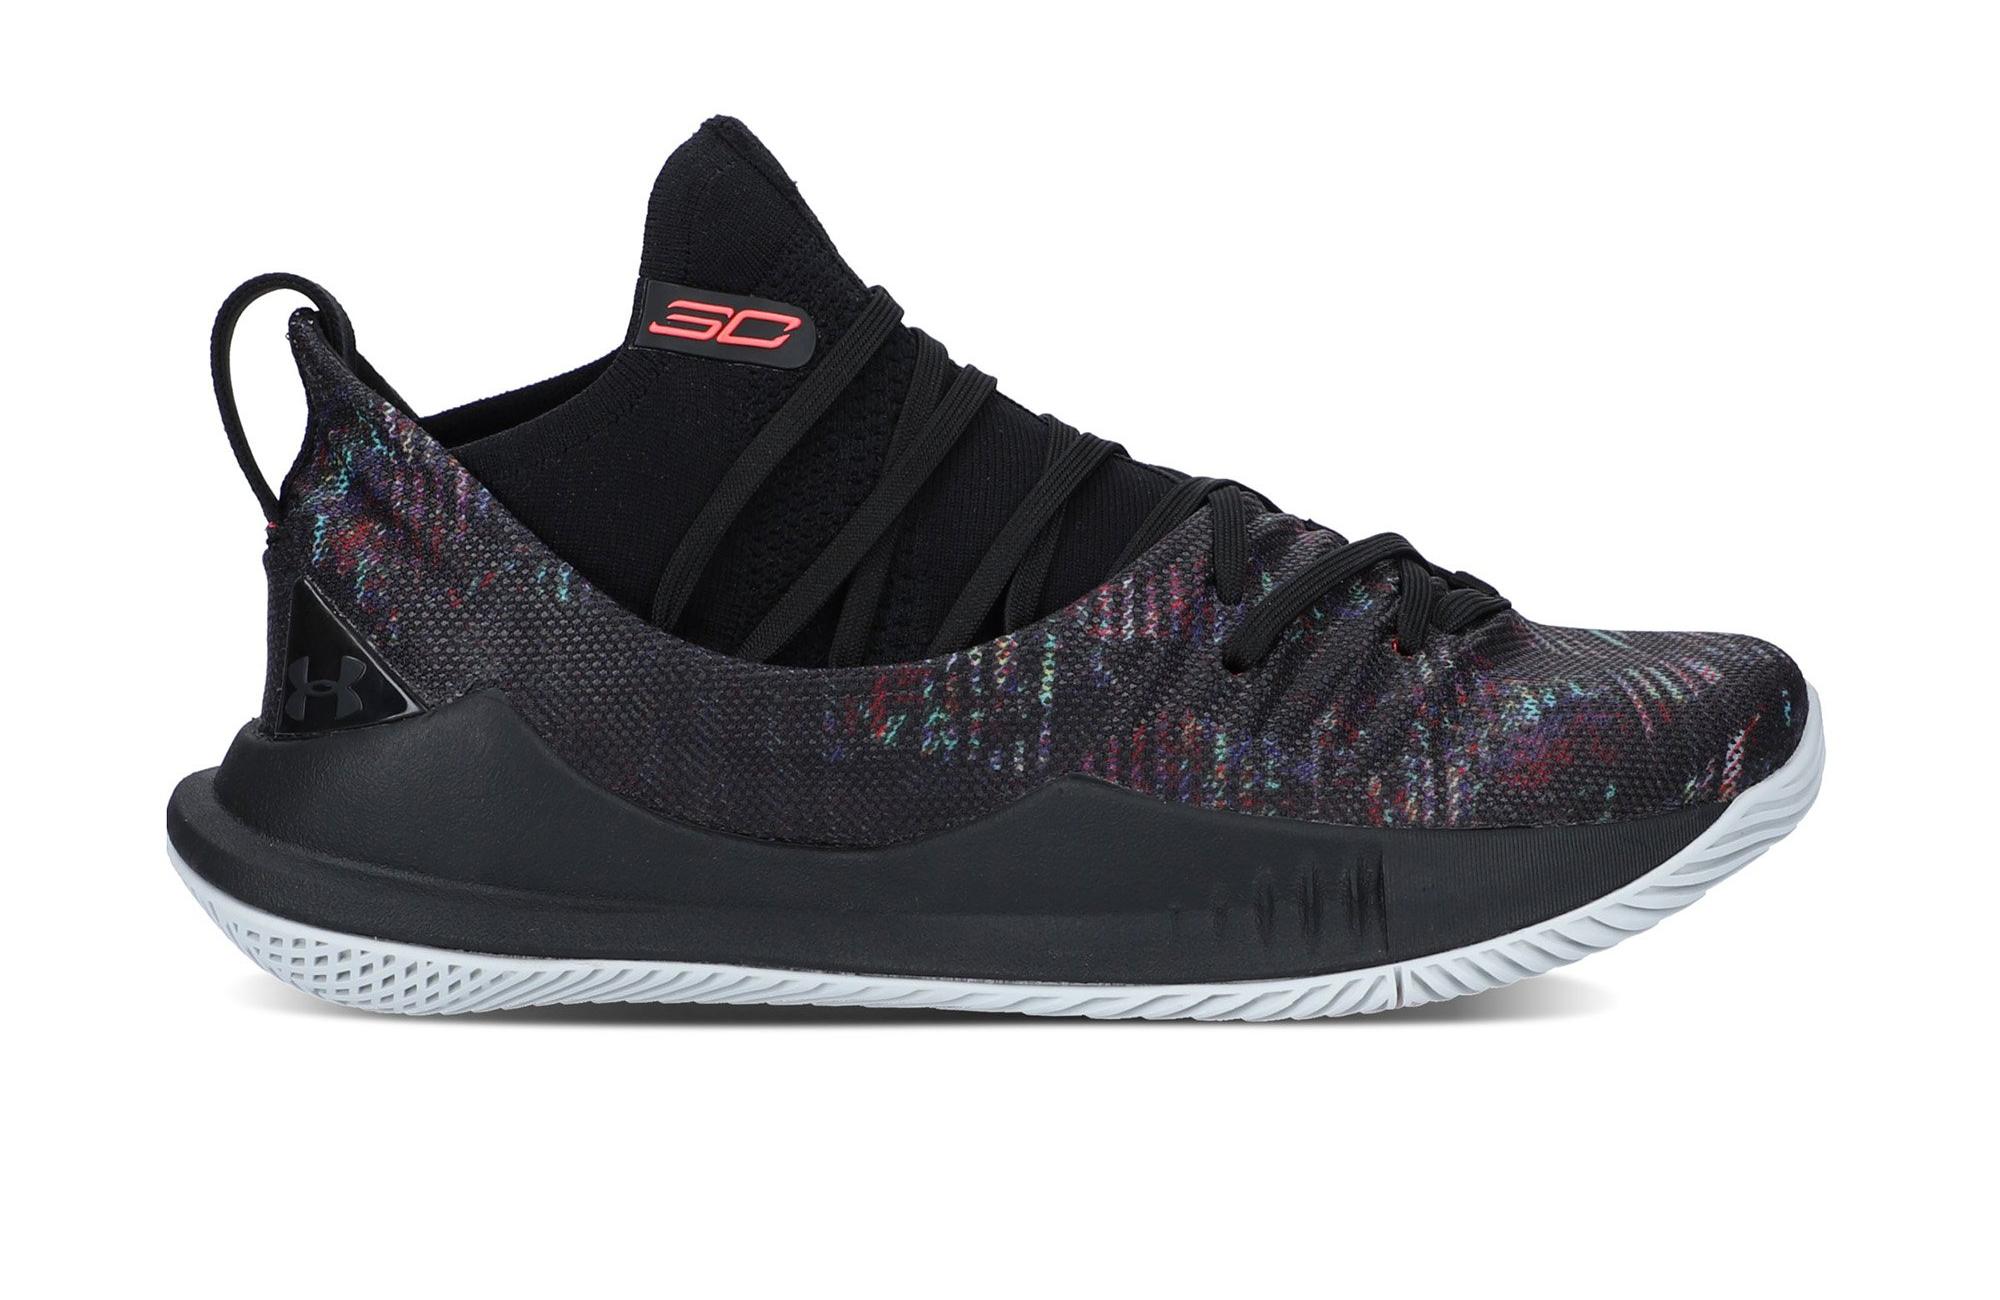 Sneakers Release – Under Armour Curry 5 “Multicolor” Basketball Shoe